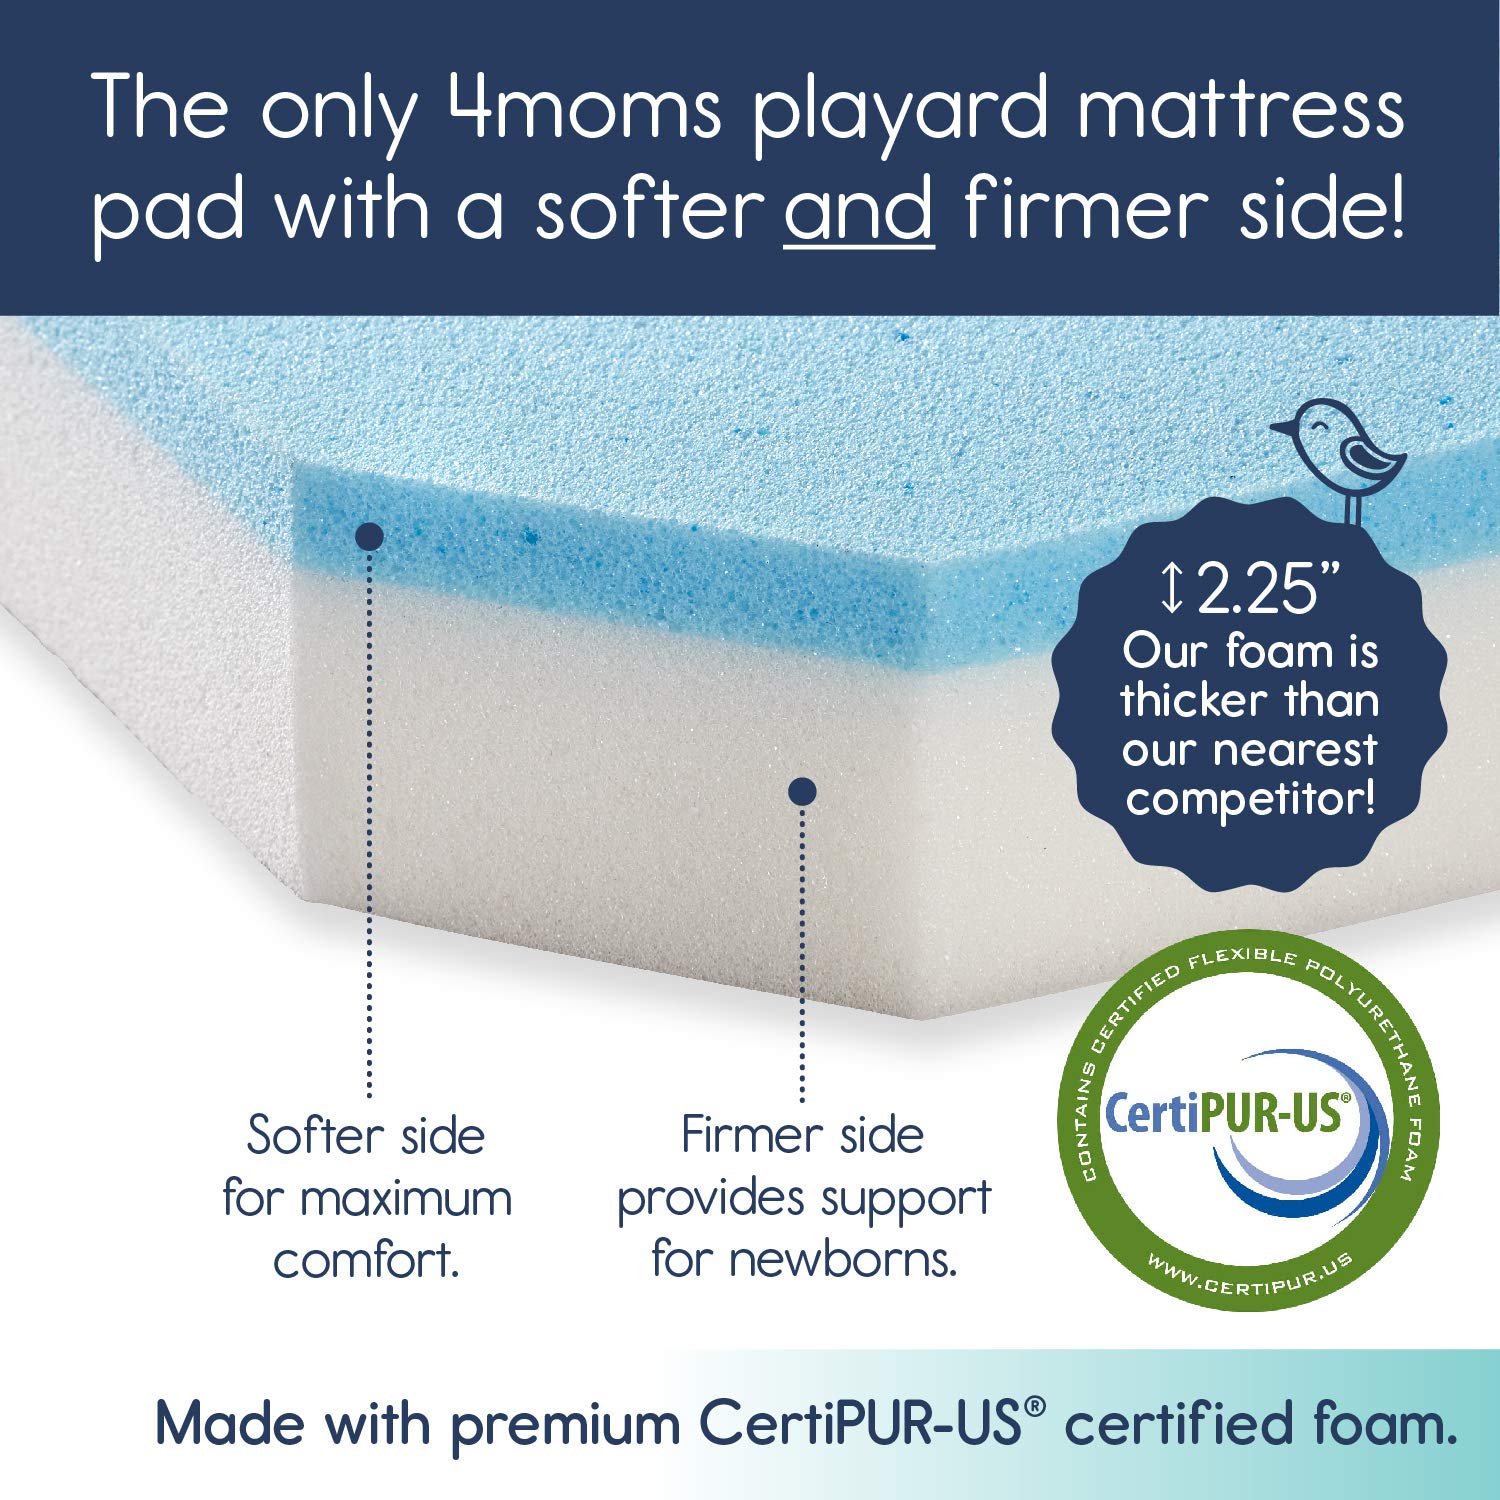 4moms Pack and Play Mattress